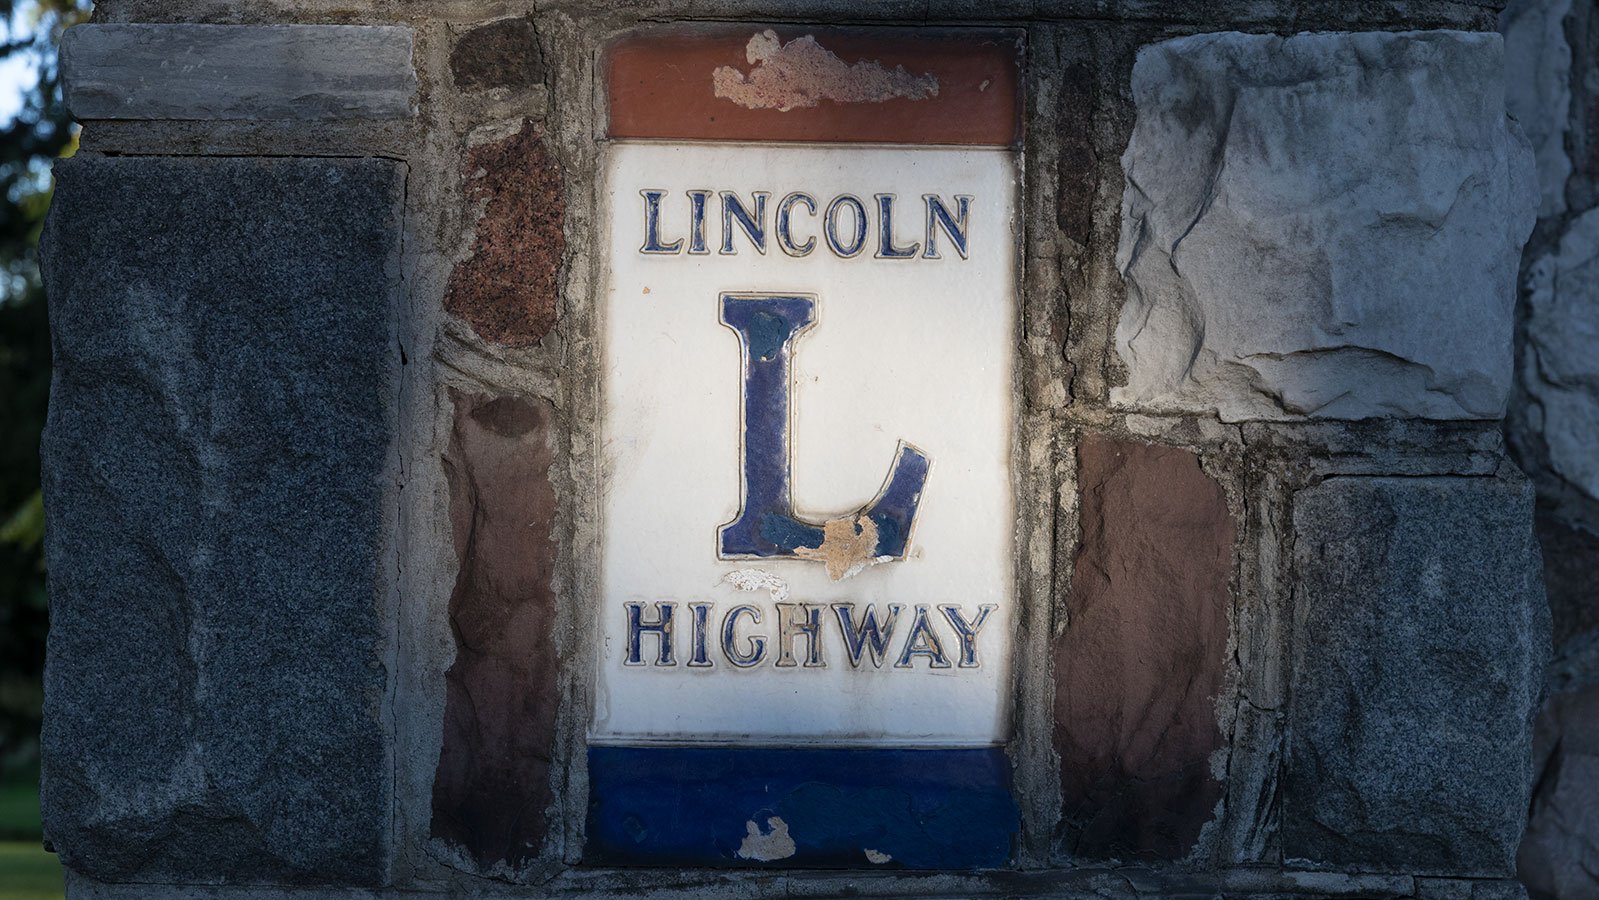 Lincoln Highway emblem embedded in the Hopley Monument in Bucyrus